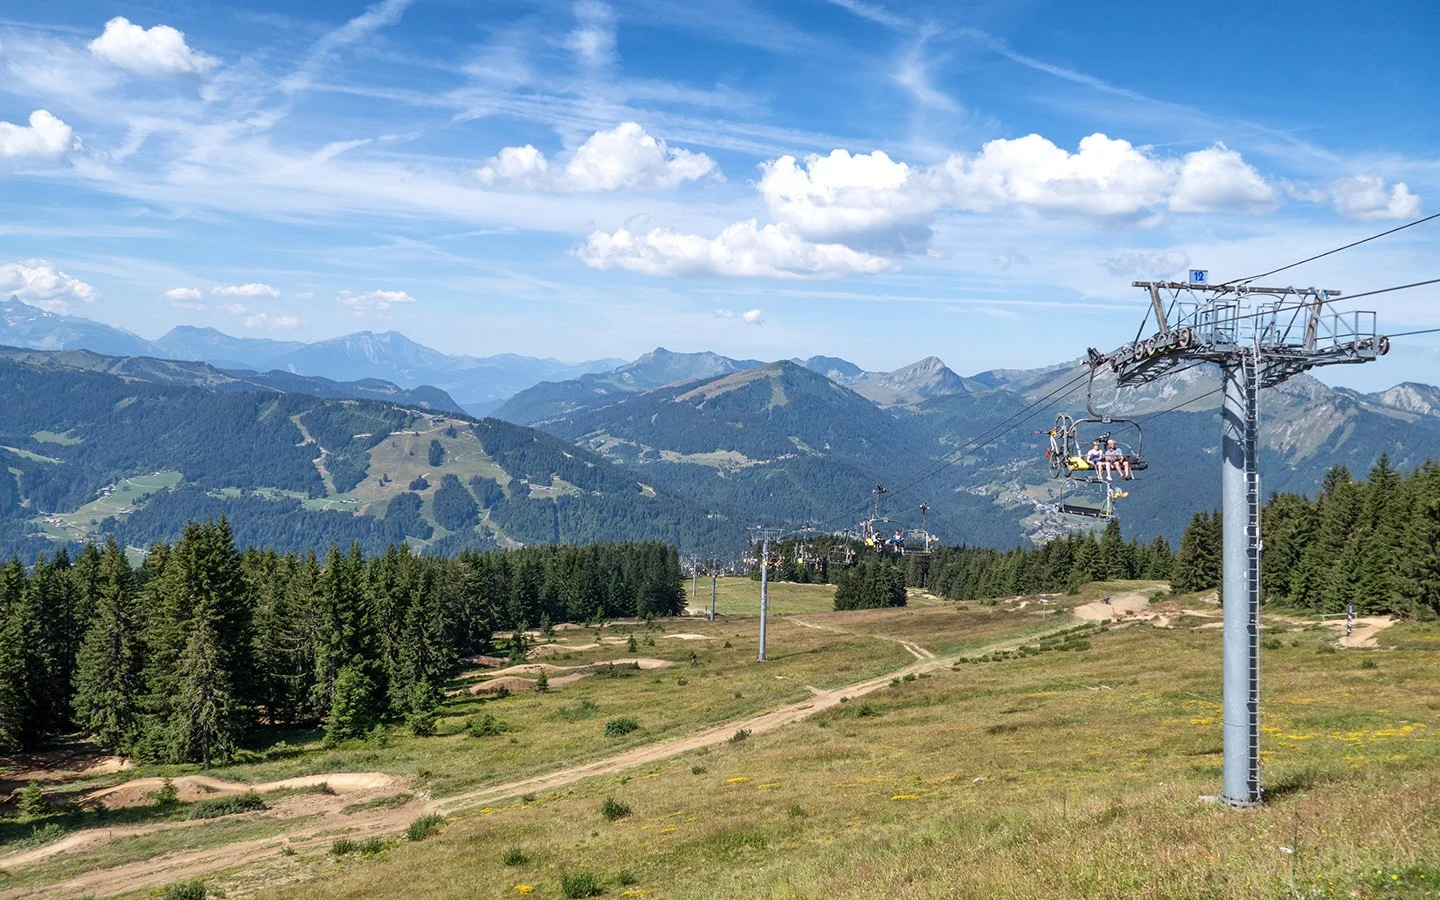 Summer in Morzine in the French Alps